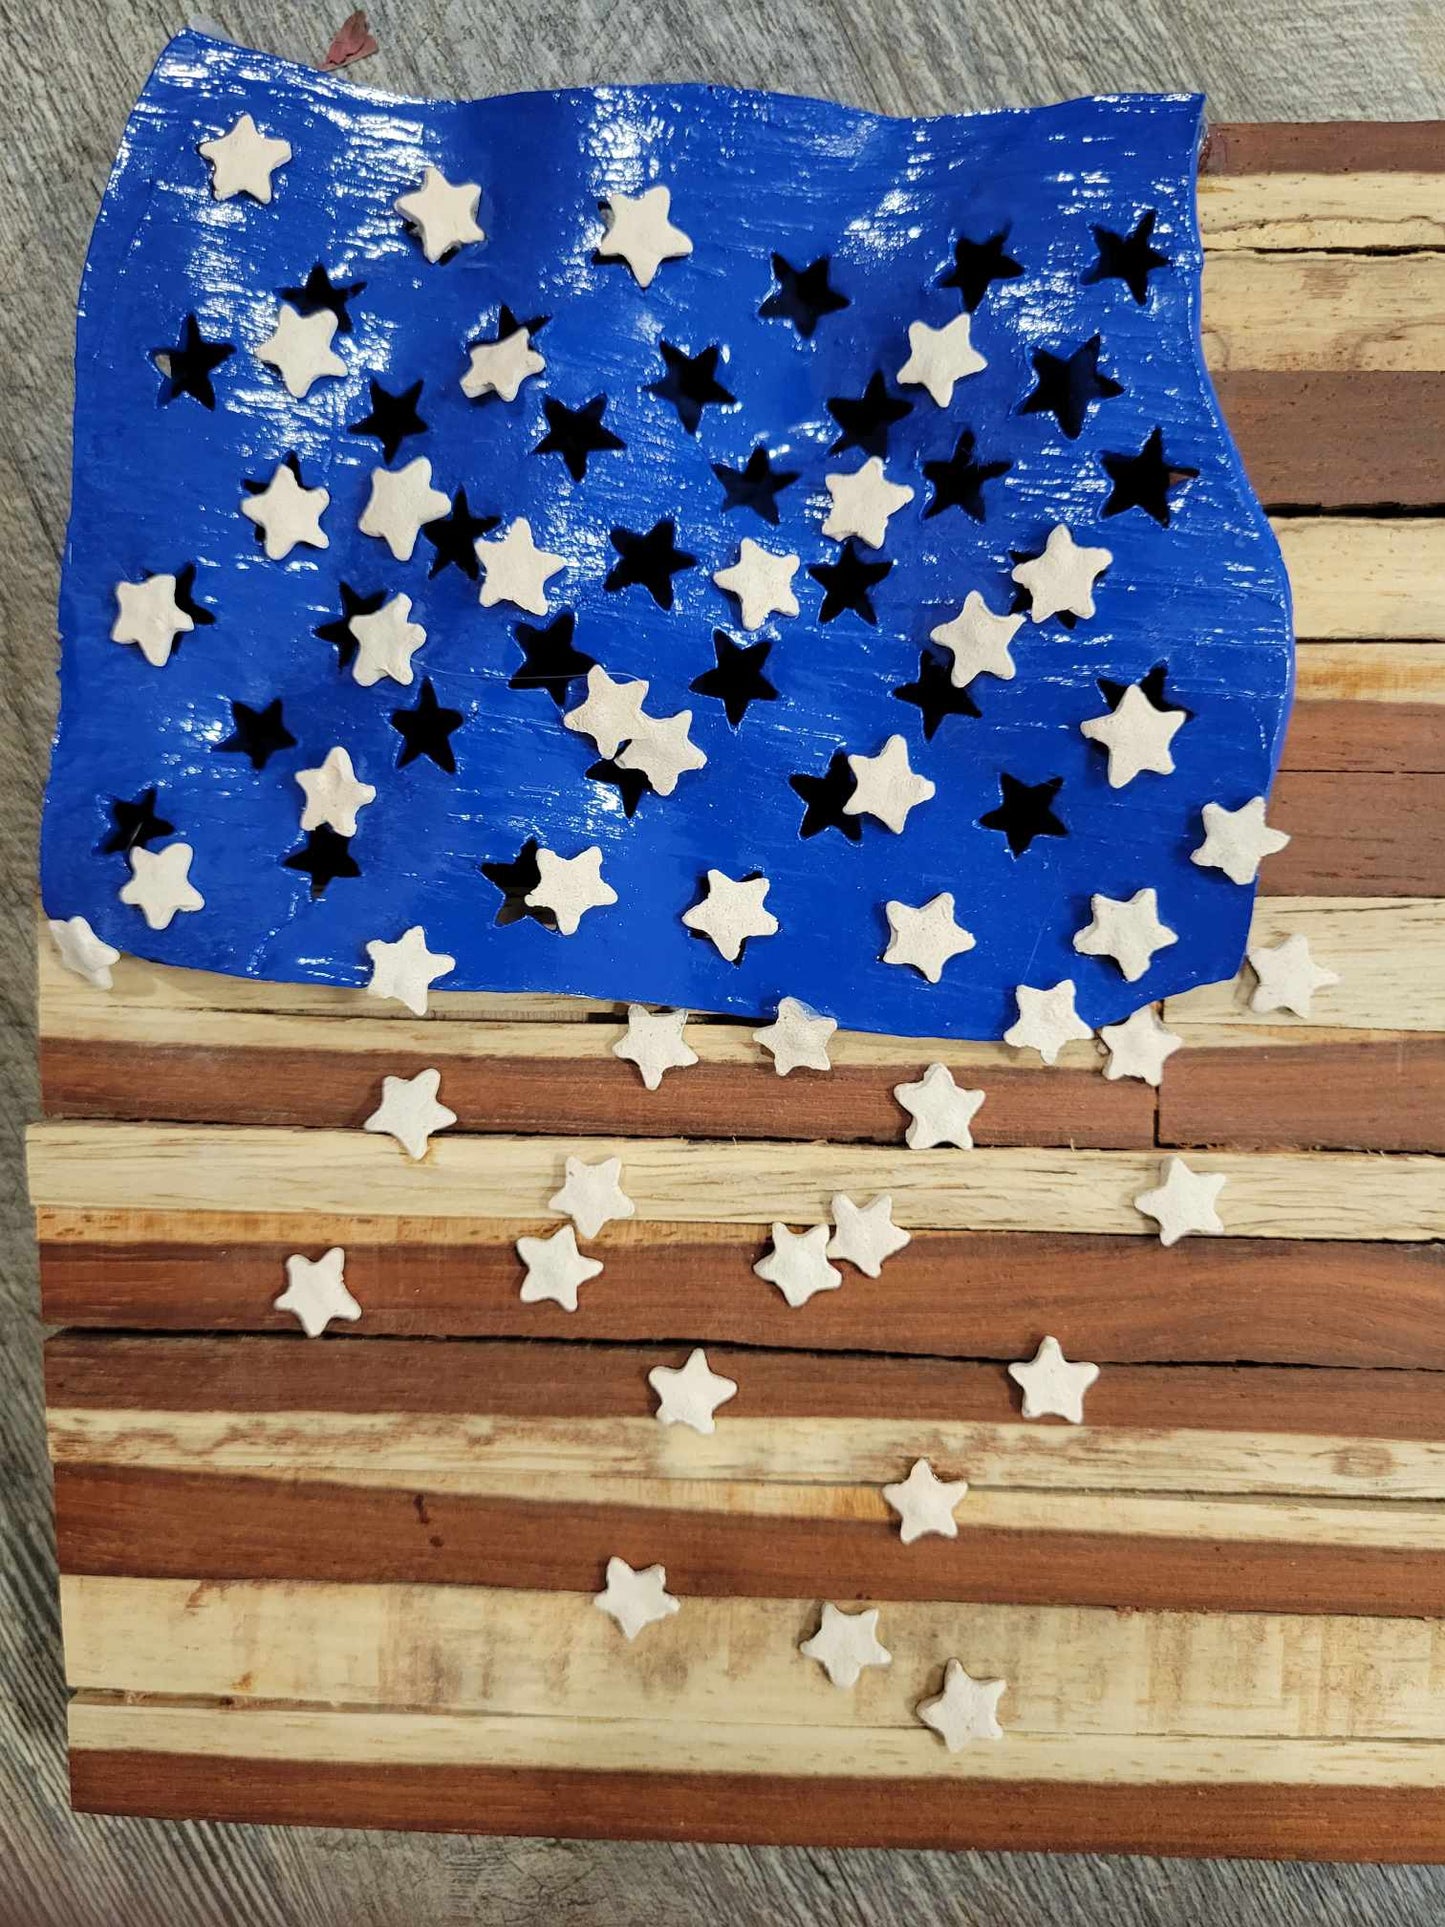 Fallen Stars of Service Wooden Flag - Dusty's Country Store